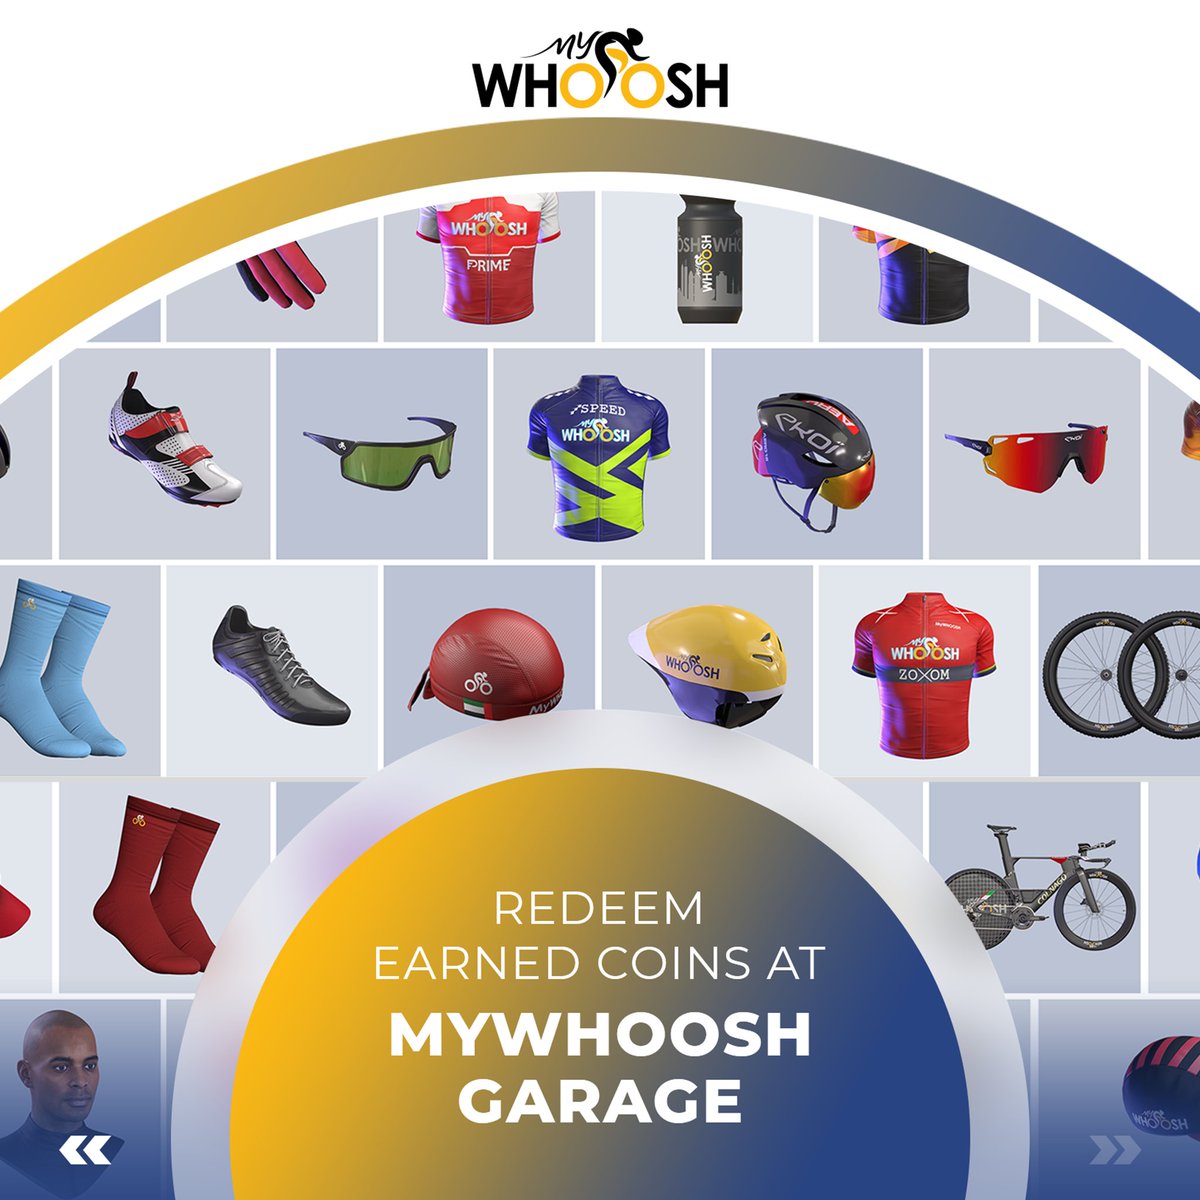 🚴 Hello riders! What accessories and gears have you already secured on #MyWhoosh? Share your list below in the comments. #MyWhooshEconomy #MyWhooshCoin #IndoorCycling #VirtualCycling